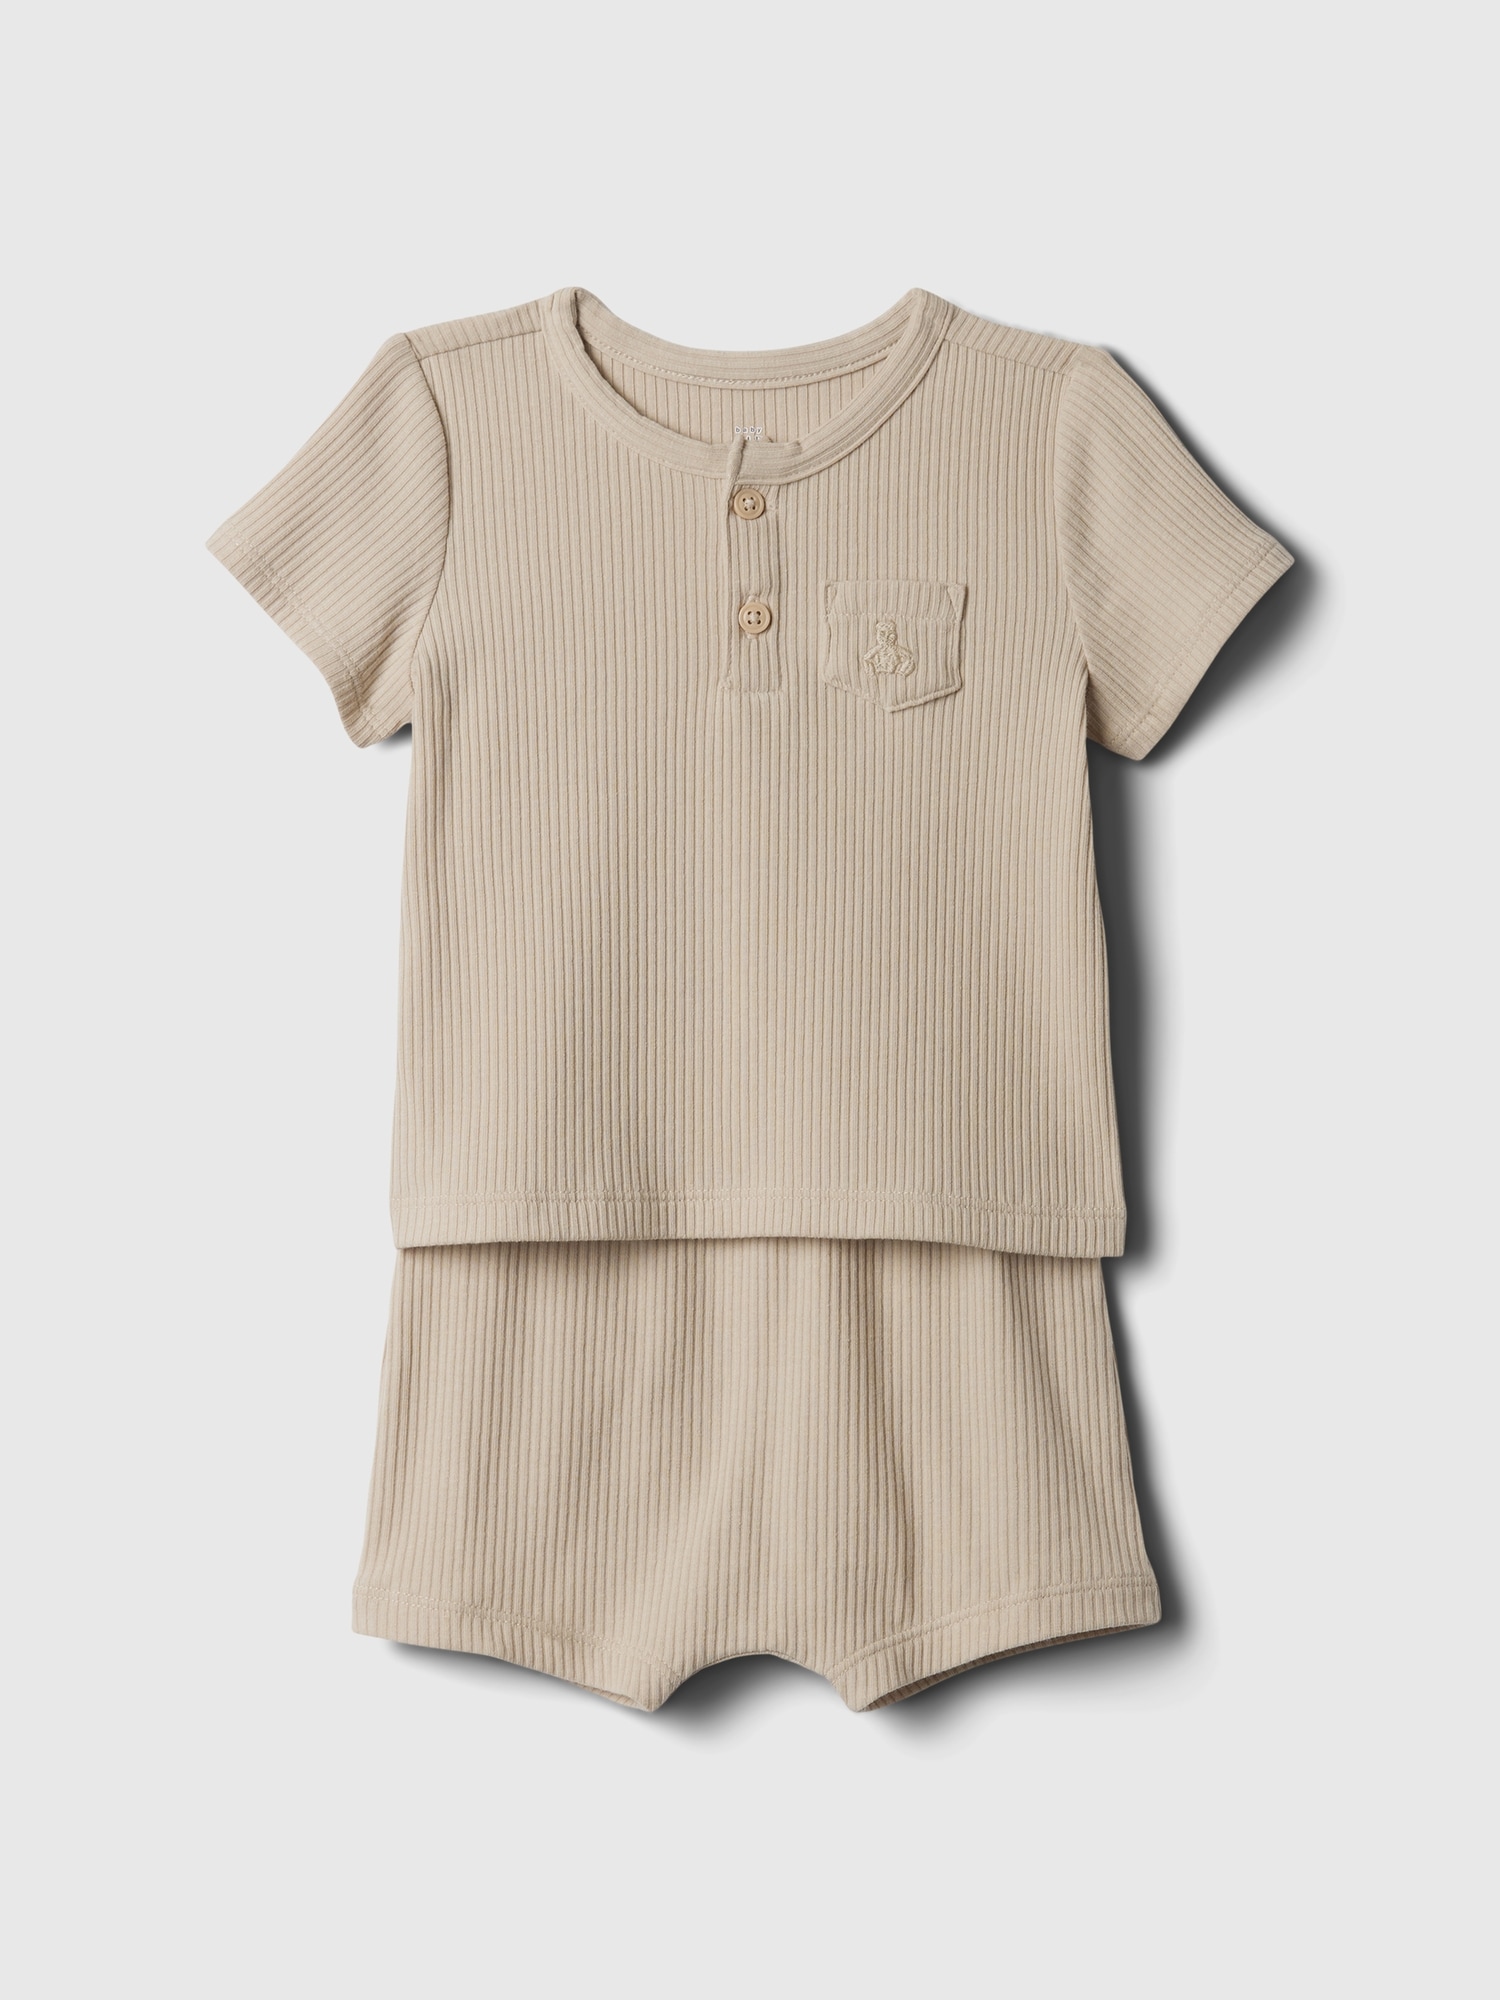 Baby Rib Outfit Set